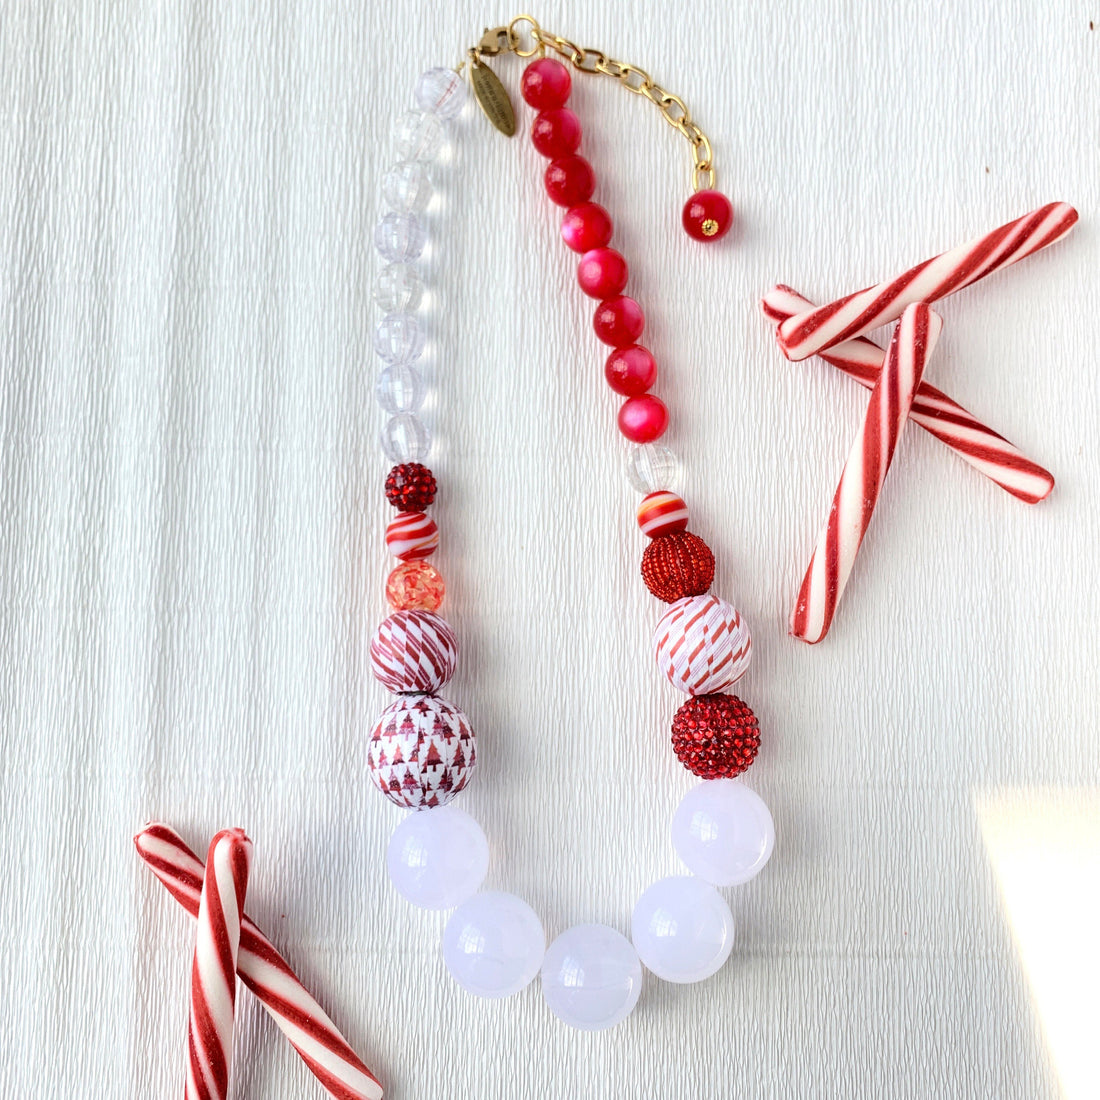 Candy Cane Necklace : 5 Steps - Instructables